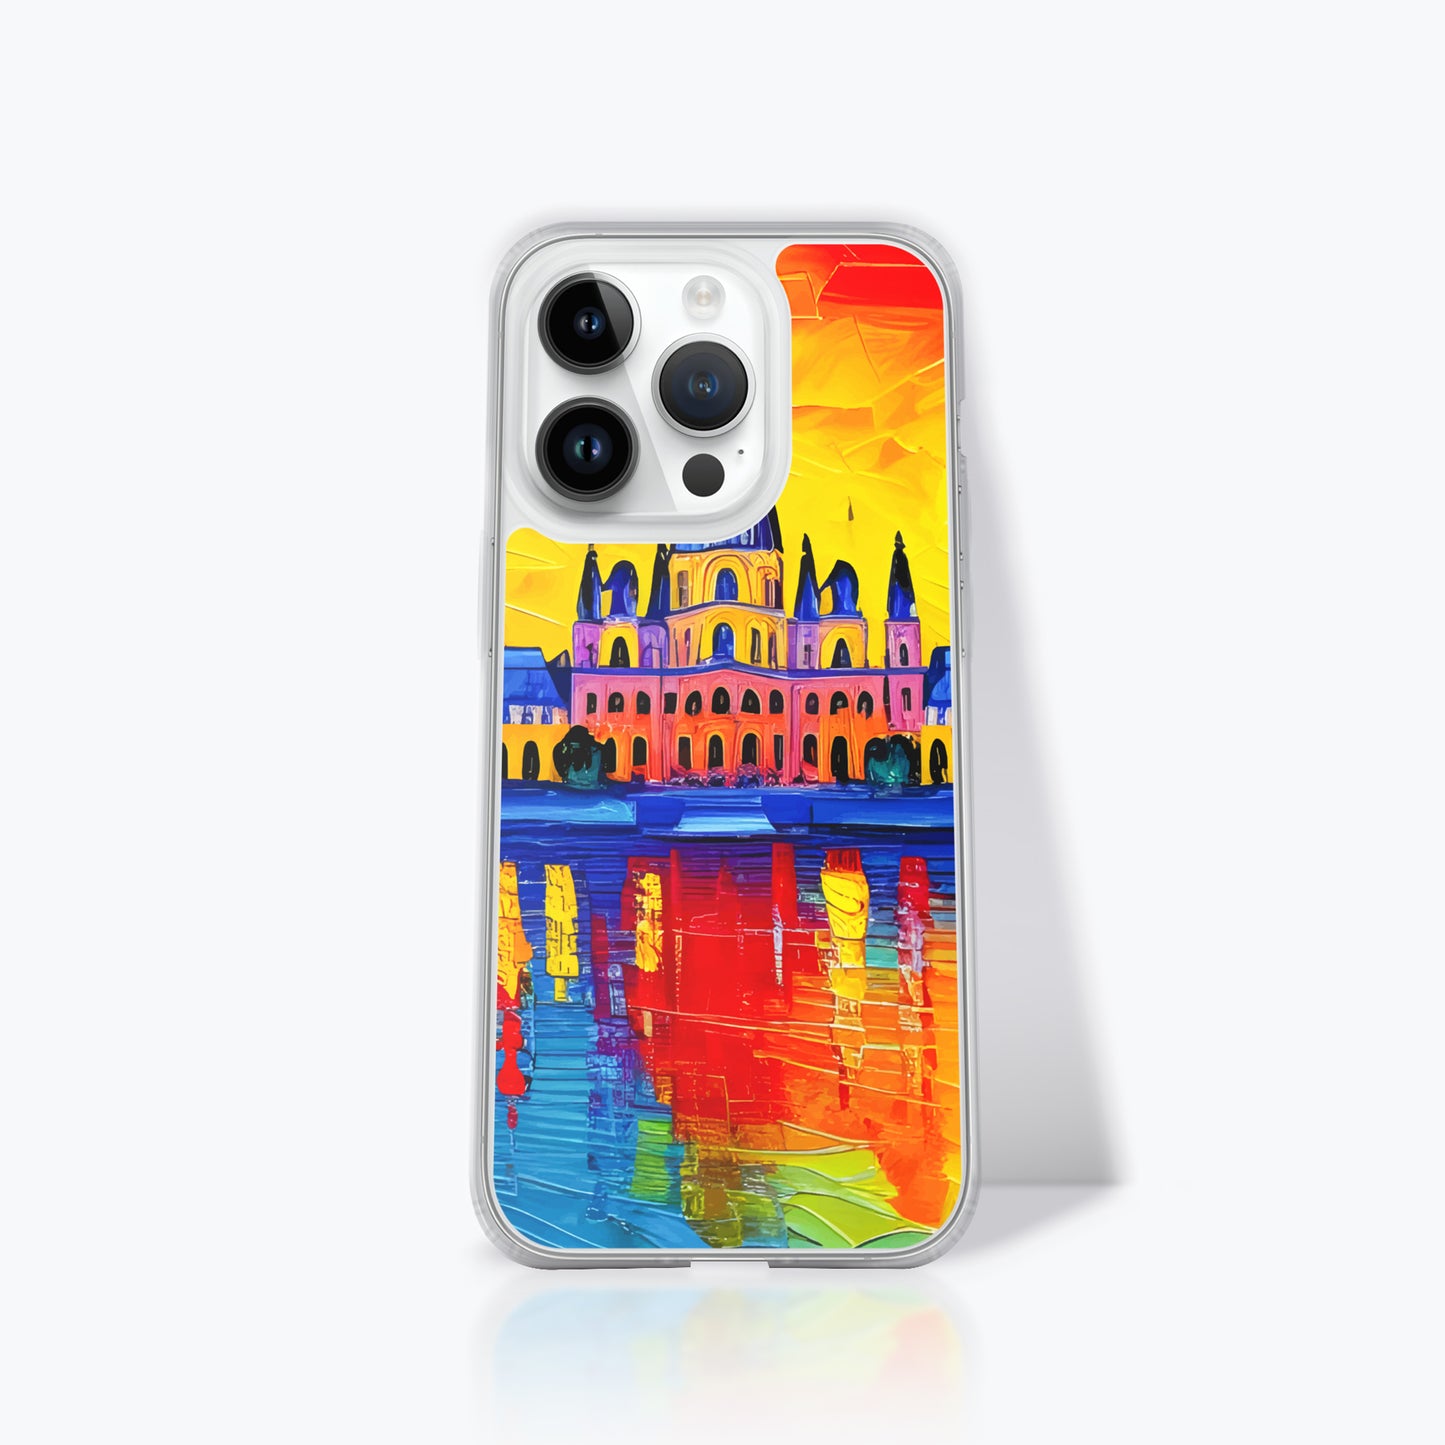 Fashionable iPhone Case with cityscape painting - Wien, Schonbrunn Palace | Seepu | 